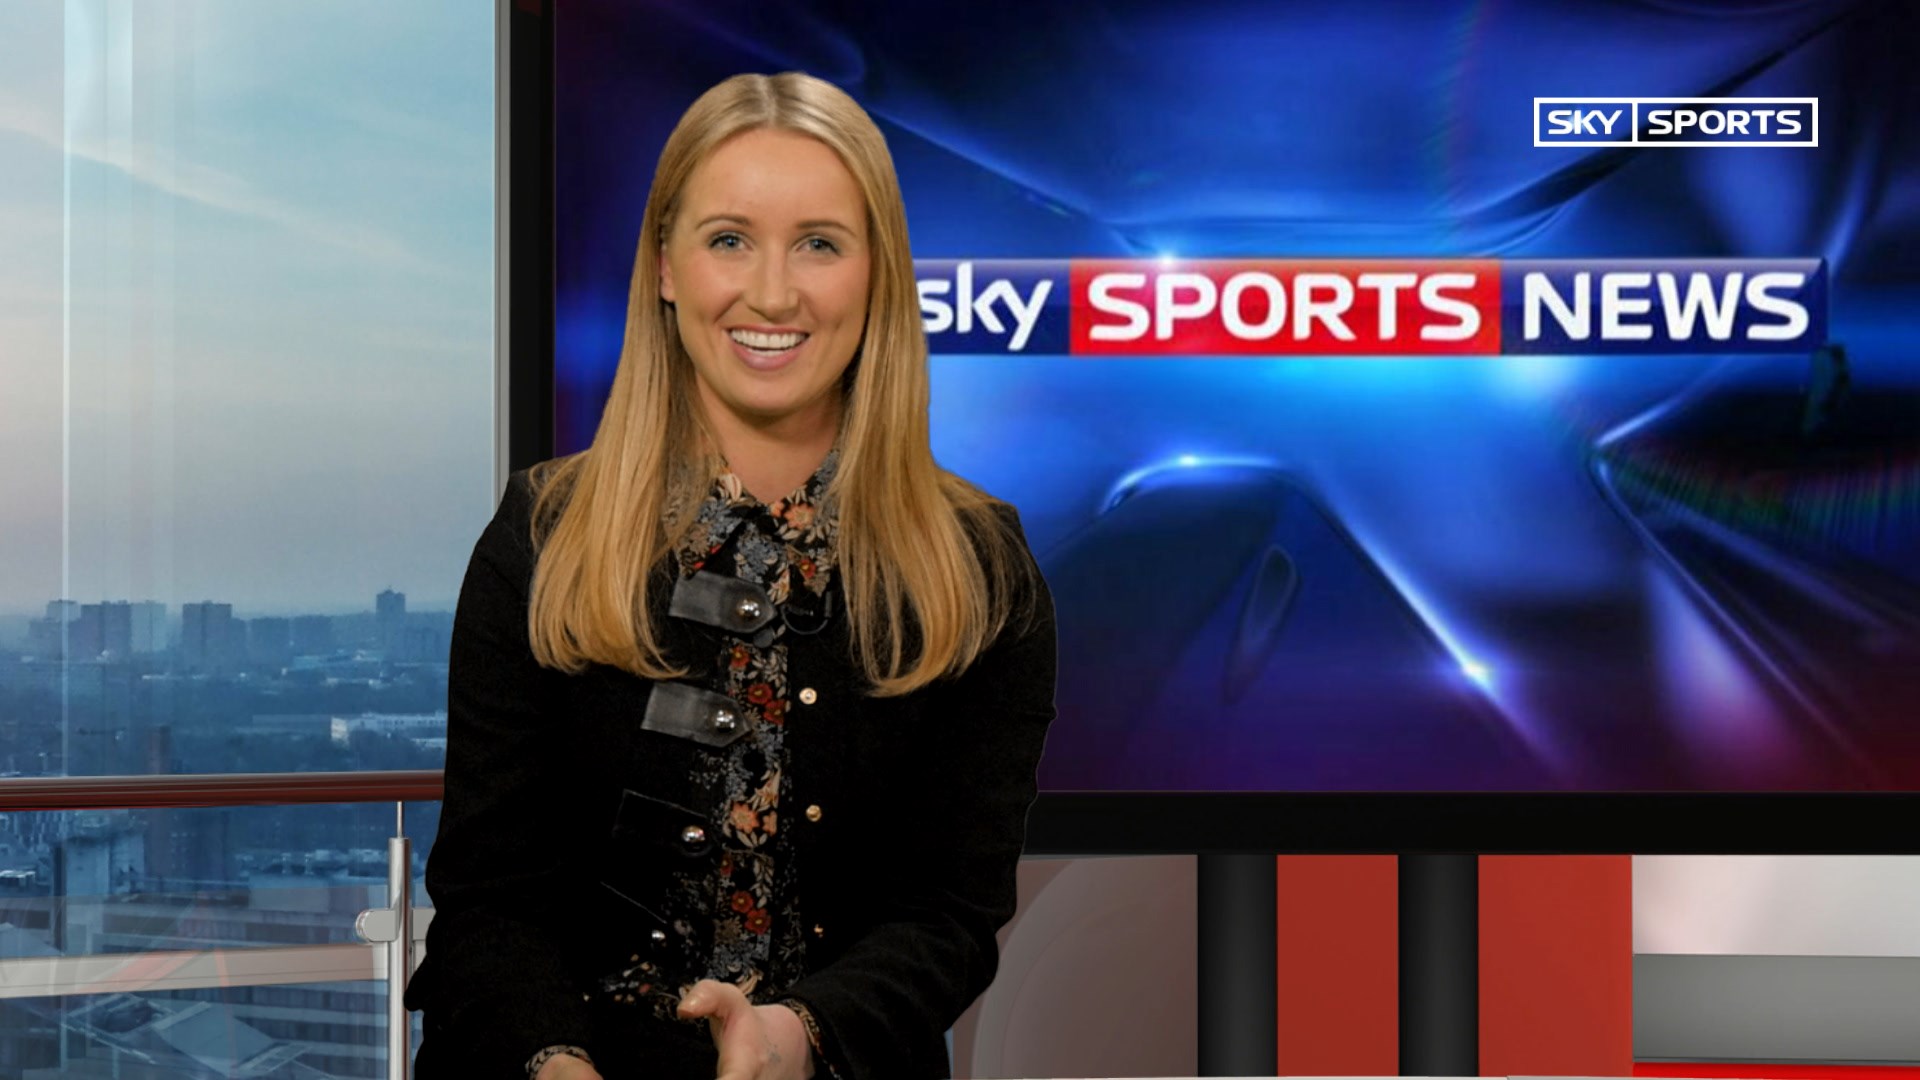 Live screen grab featuring live virtual set in simulated sport news style at Pozitiv's TV studio, London, UK